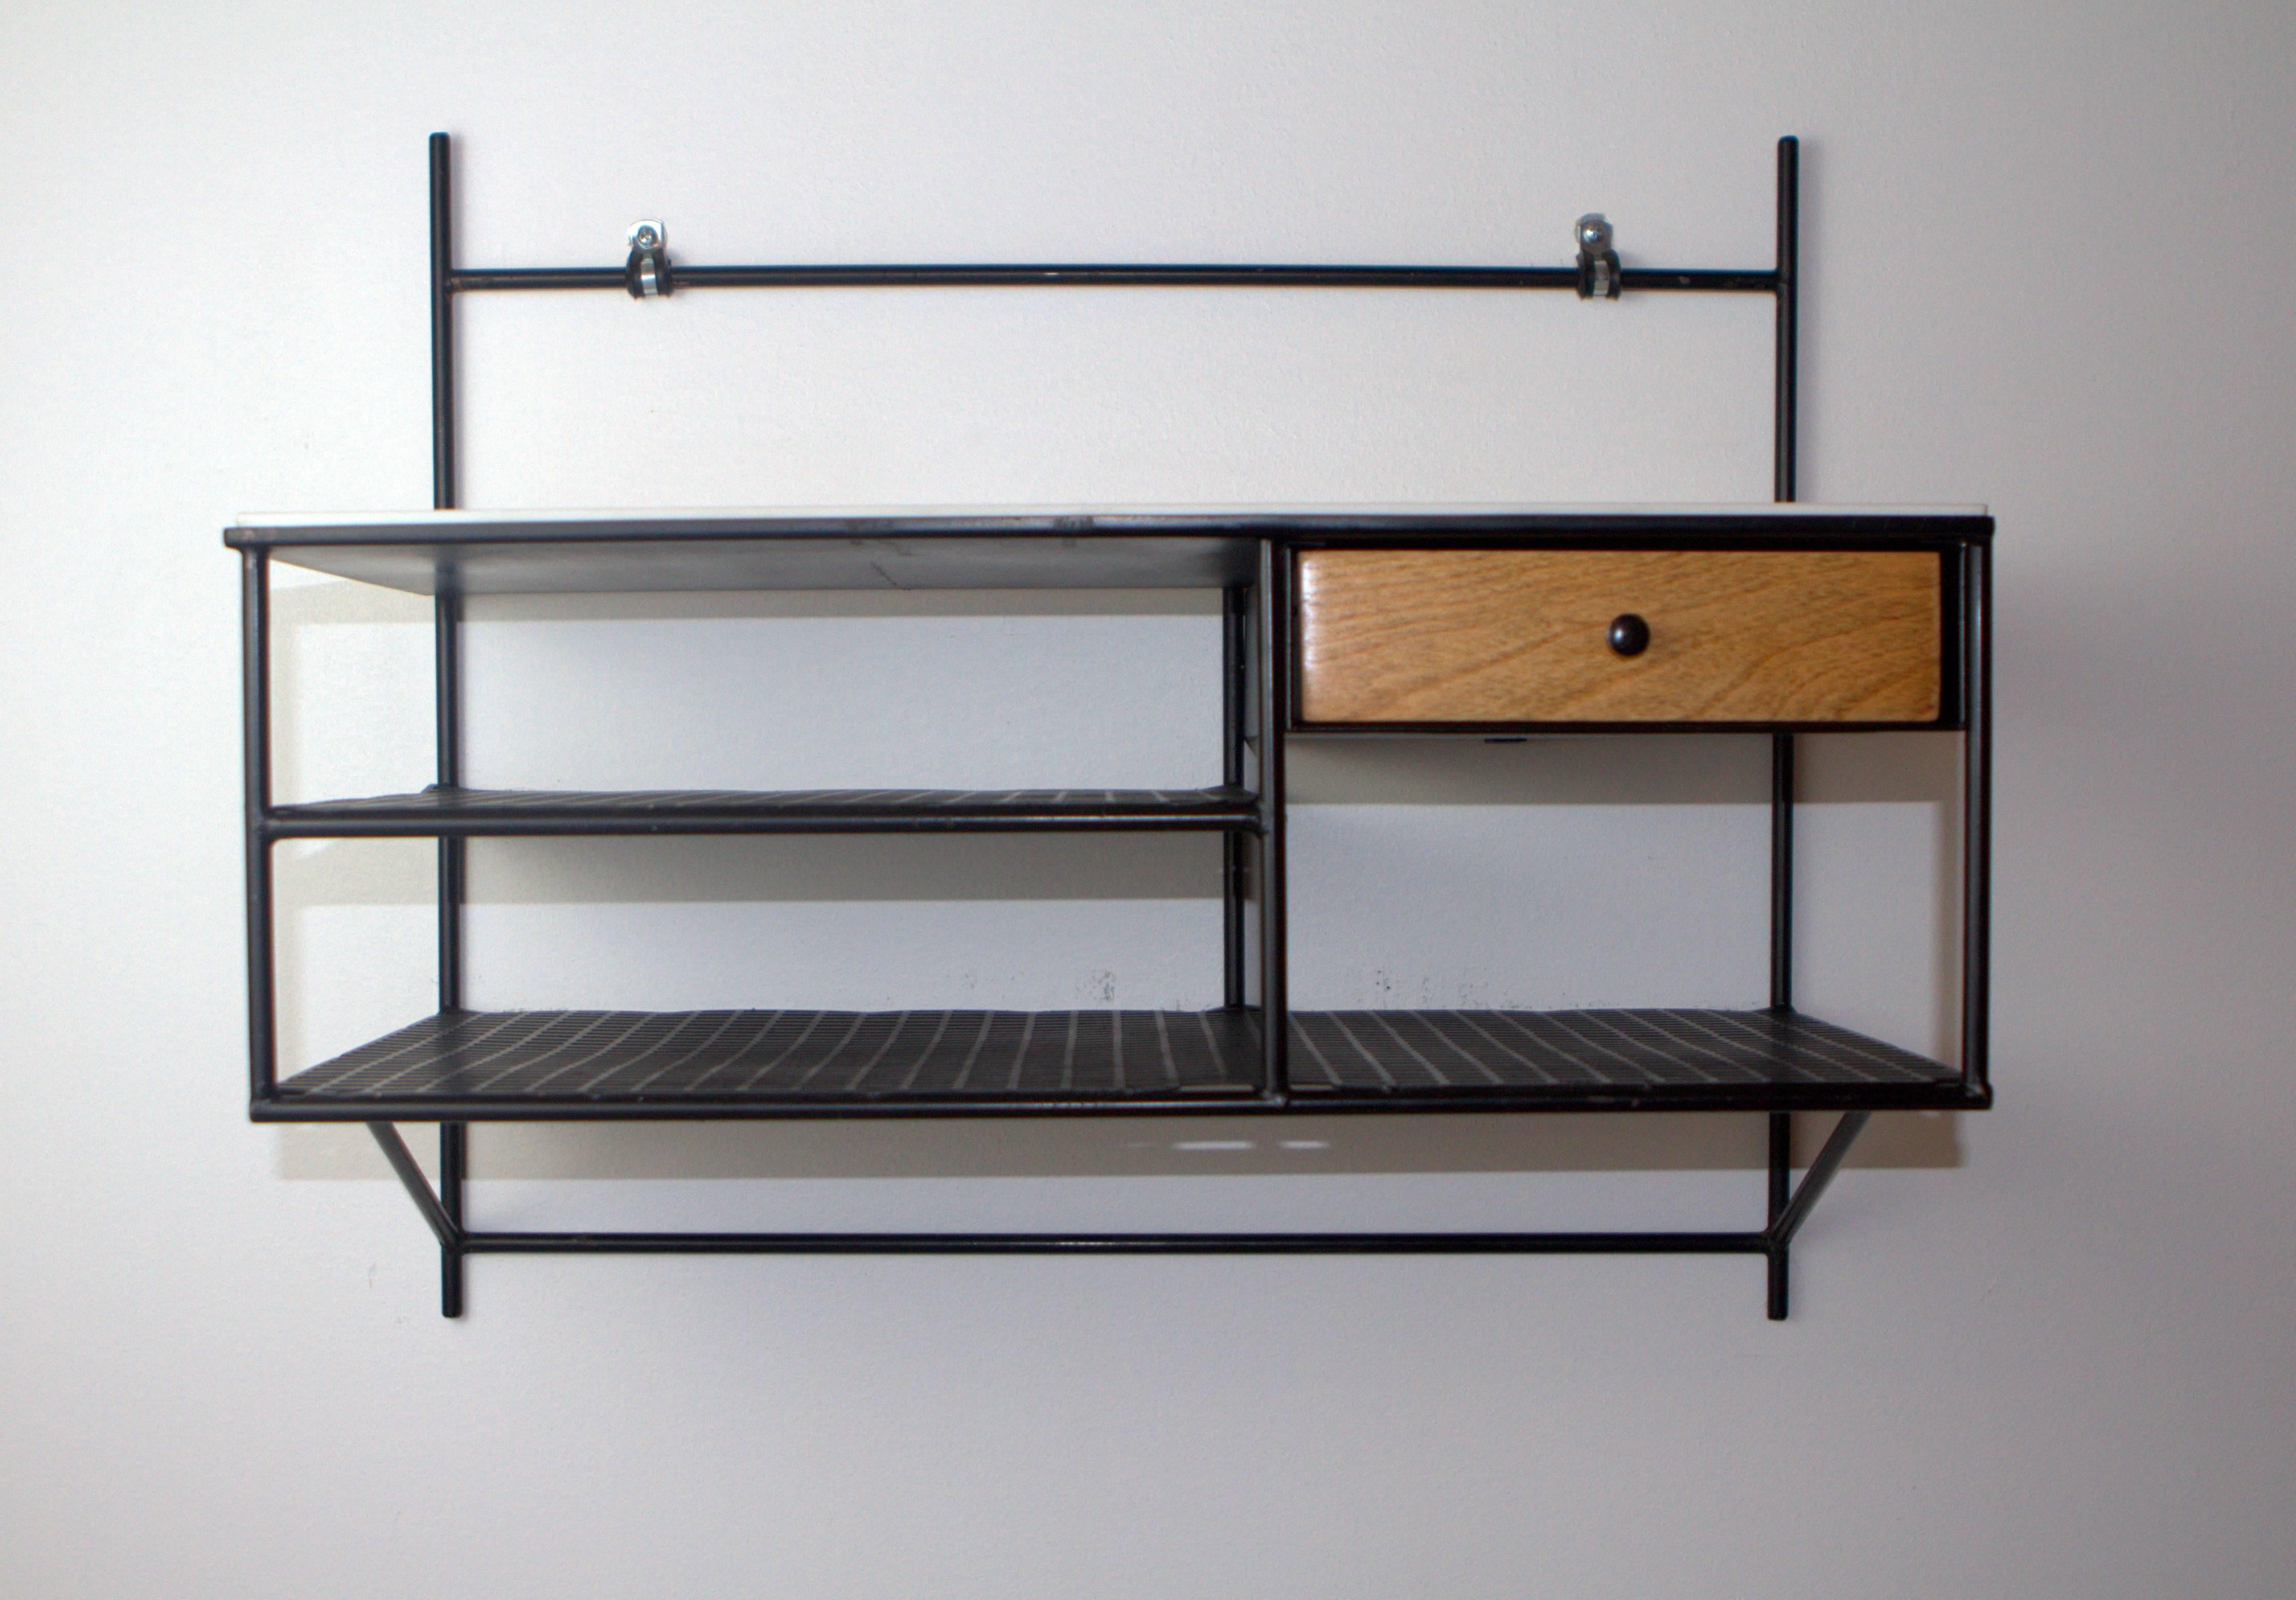 Rare Paul McCobb for Bryce Originals enameled metal wall shelf with a single birch drawer and original vitrolite glass top. Perfect for any space, easily hung (here shown with hardware store brackets), open metal mesh shelves, metal rod frame, birch